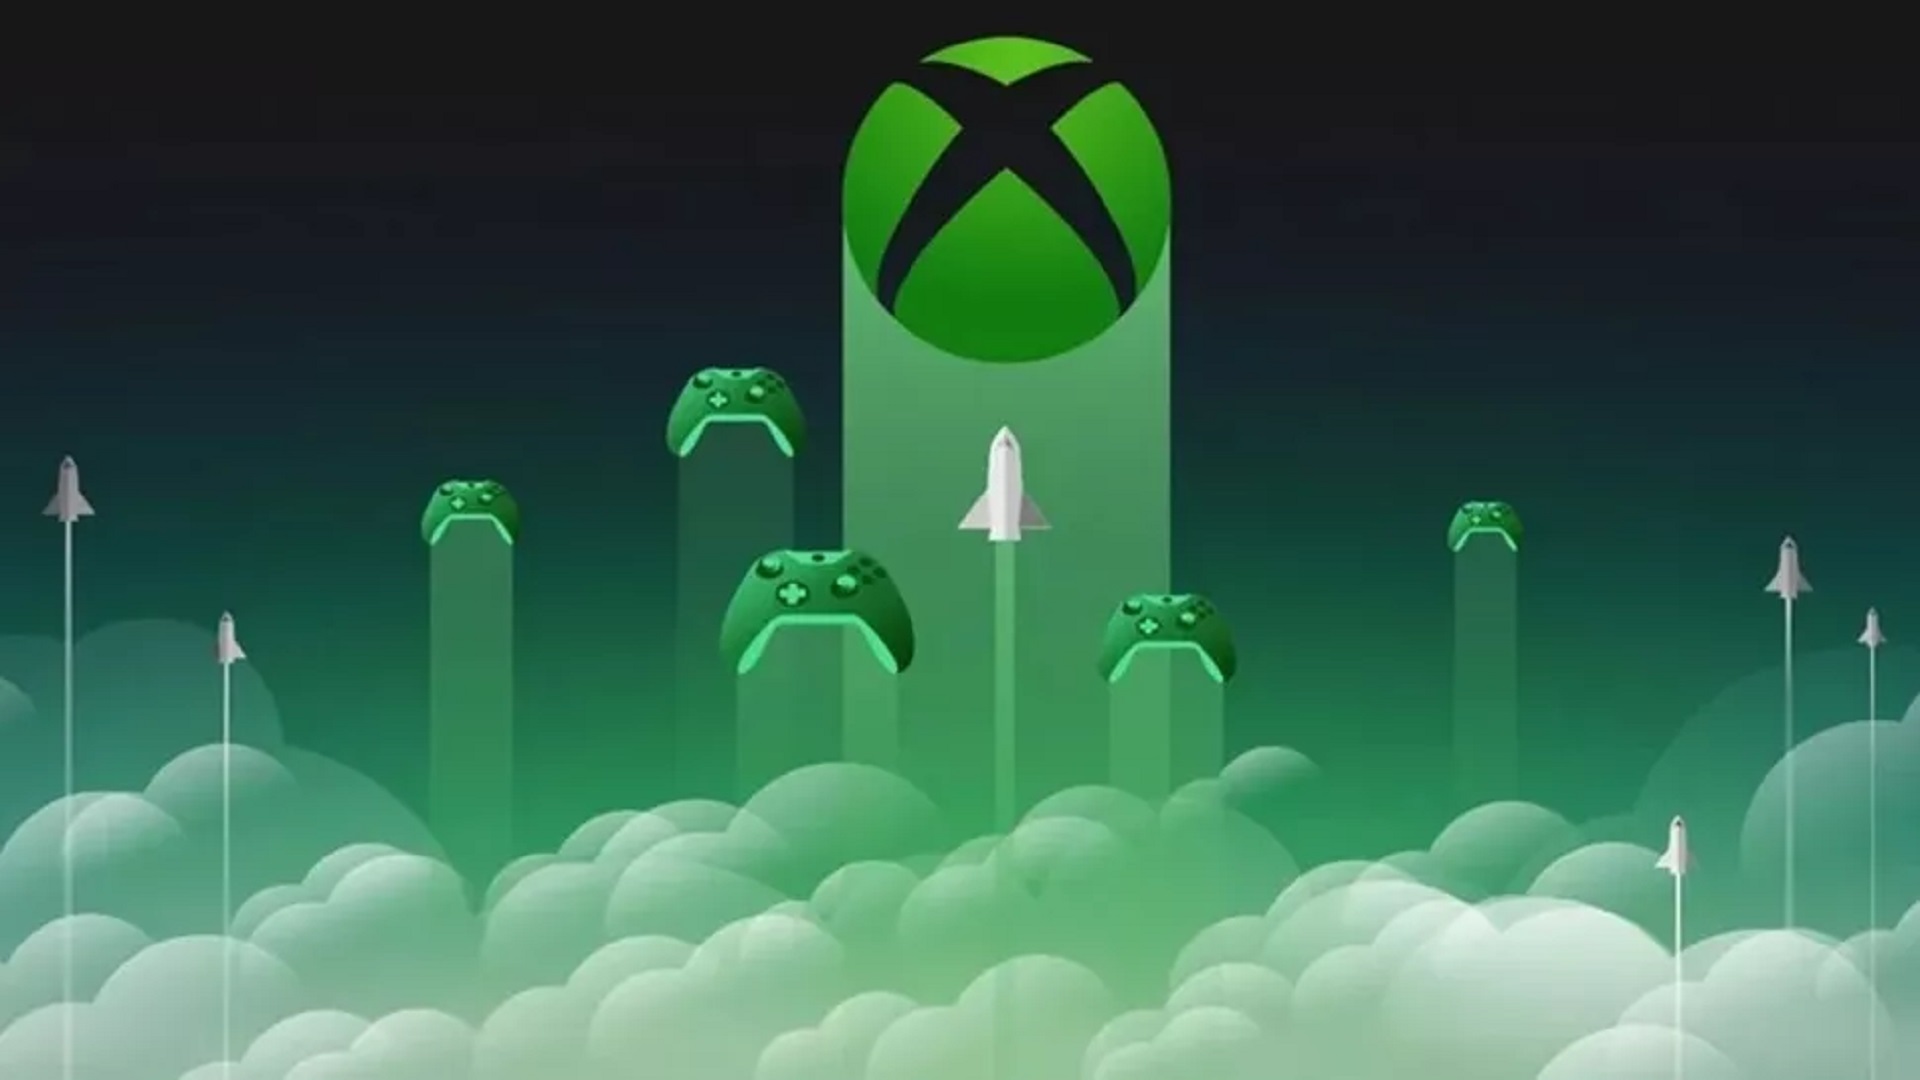 Phil Spencer Responds To Xbox Layoffs, Calls It A 'Difficult